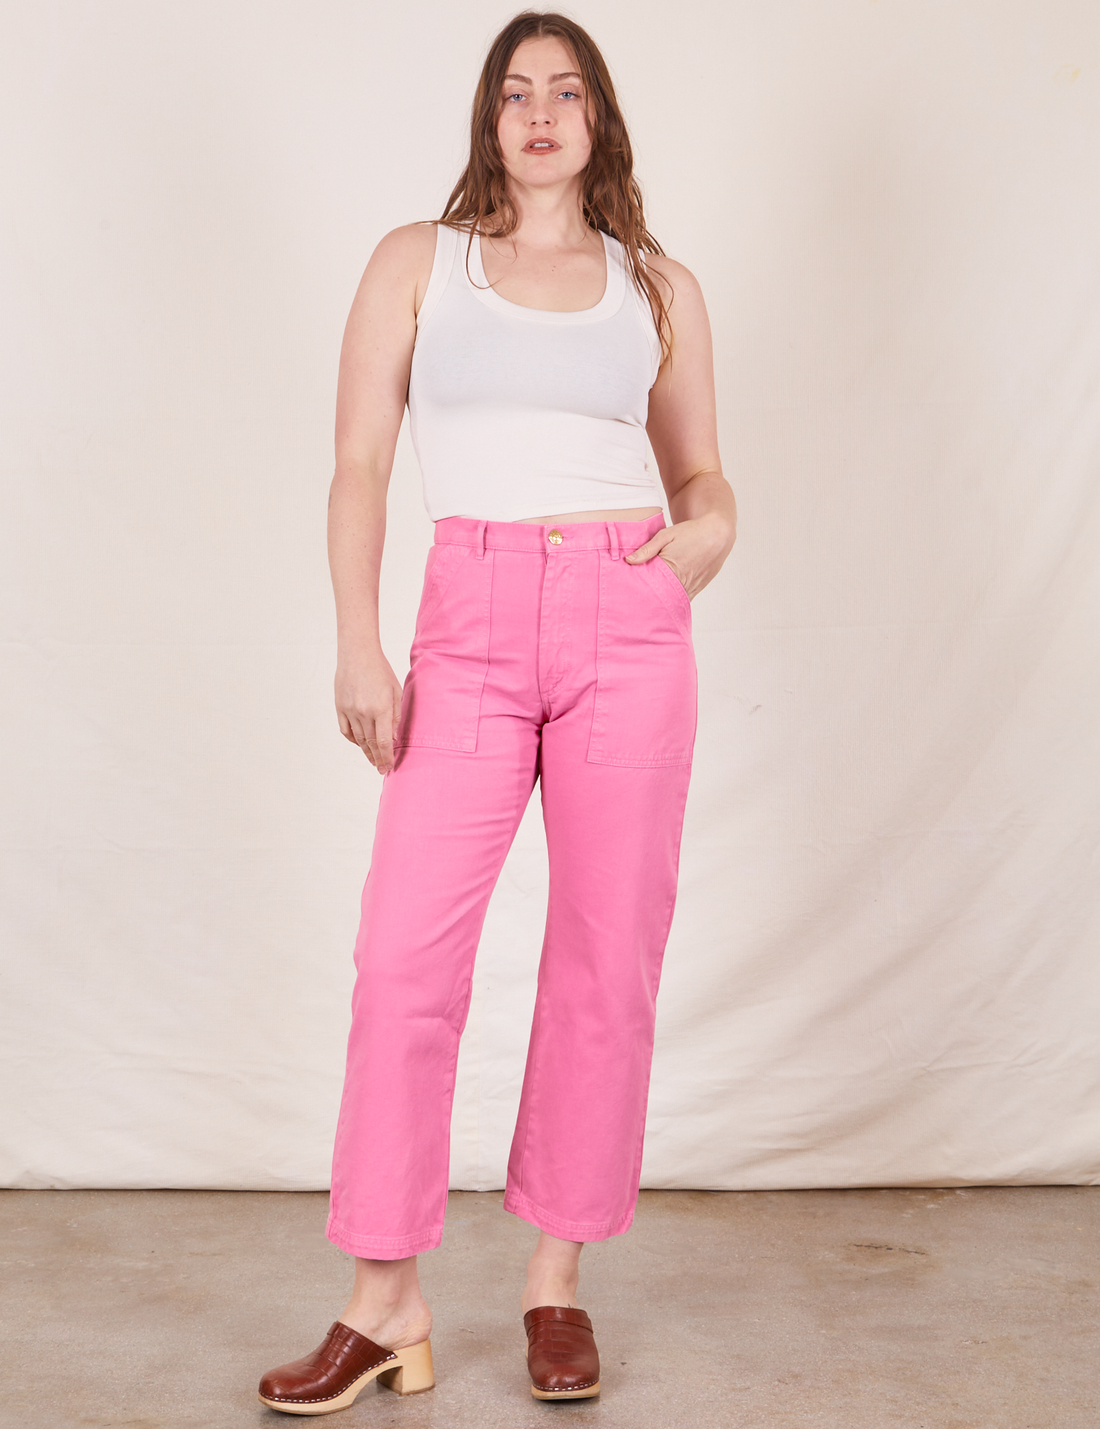 Allison is 5'10" and wearing size S Work Pants in Bubblegum Pink paired with vintage off-white Tank Top